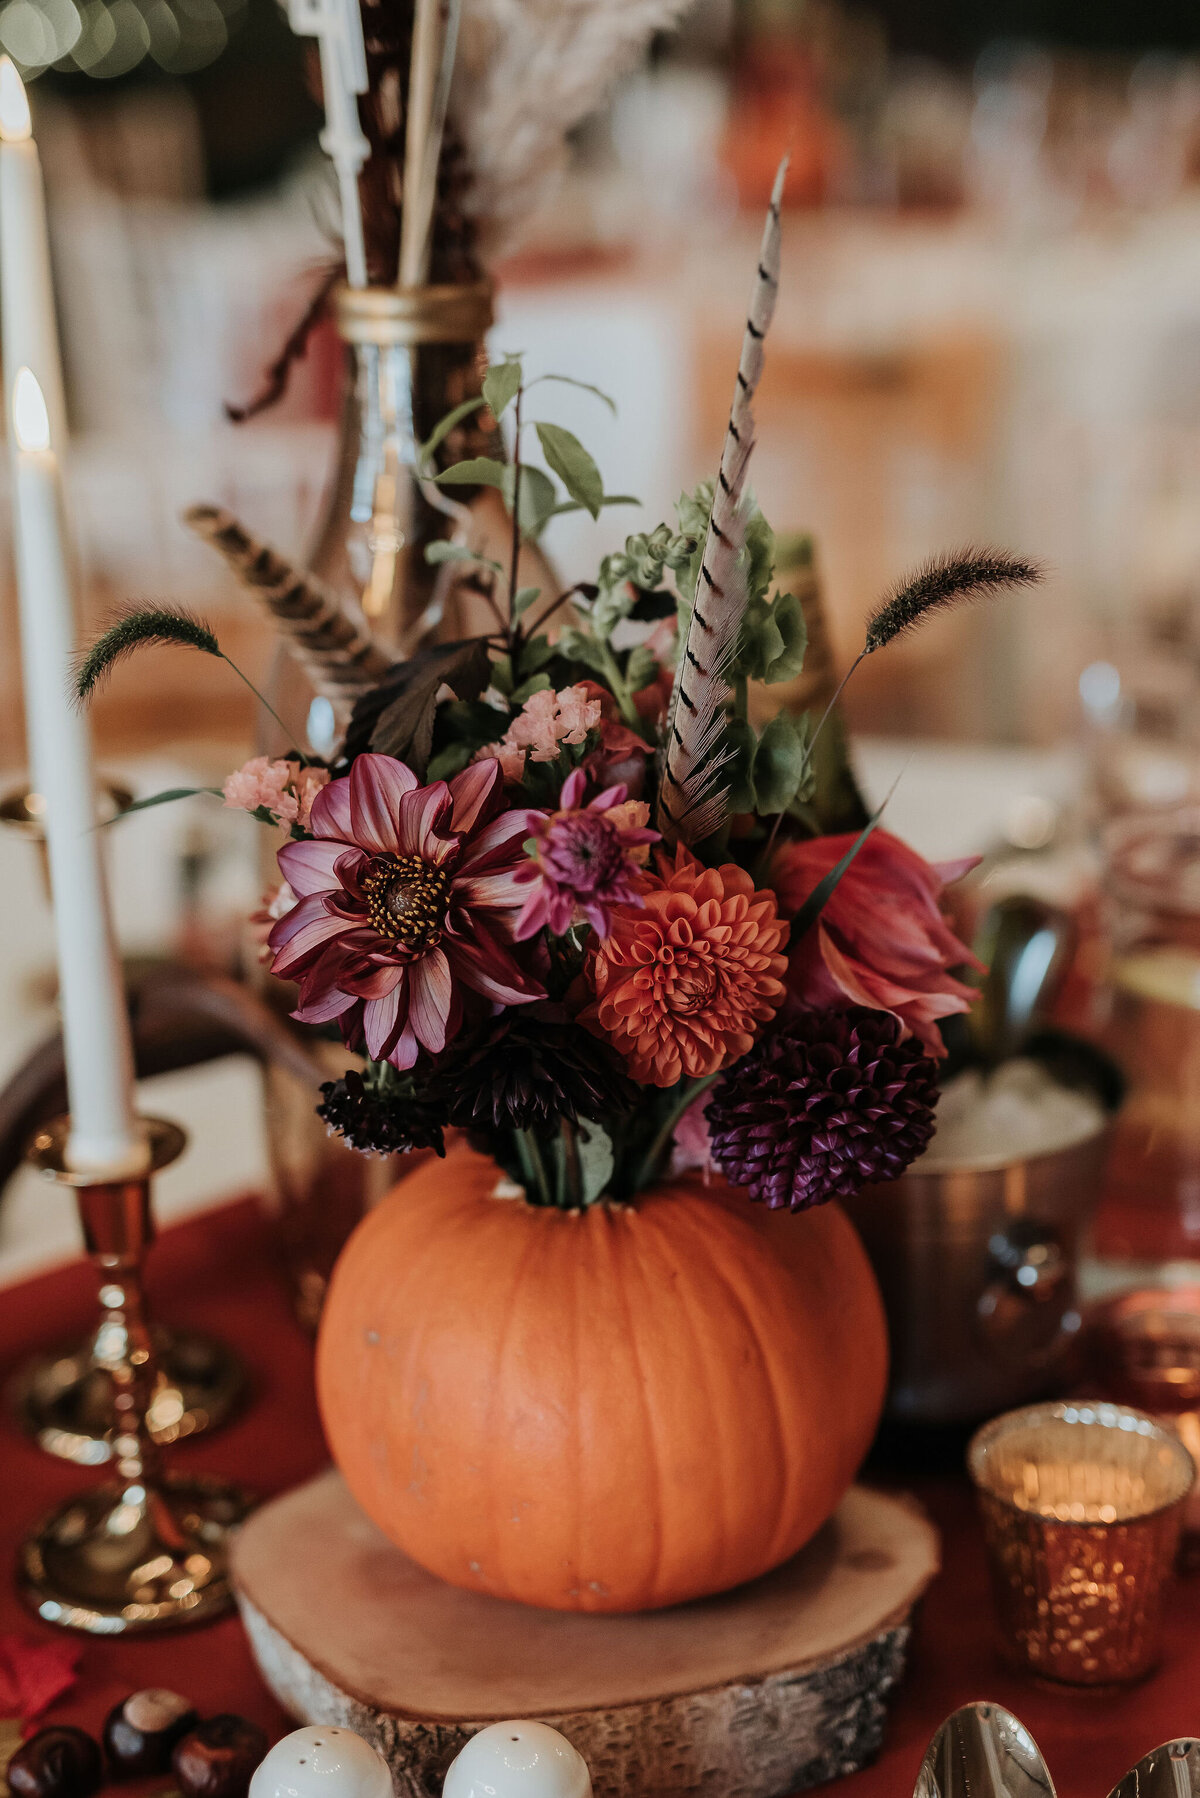 Large orange pumpkin filled with beautiful warm toned wedding flowers and pheasant feather placed on a wooden slice at a rustic Autumn wedding at Montague Farm, Sussex